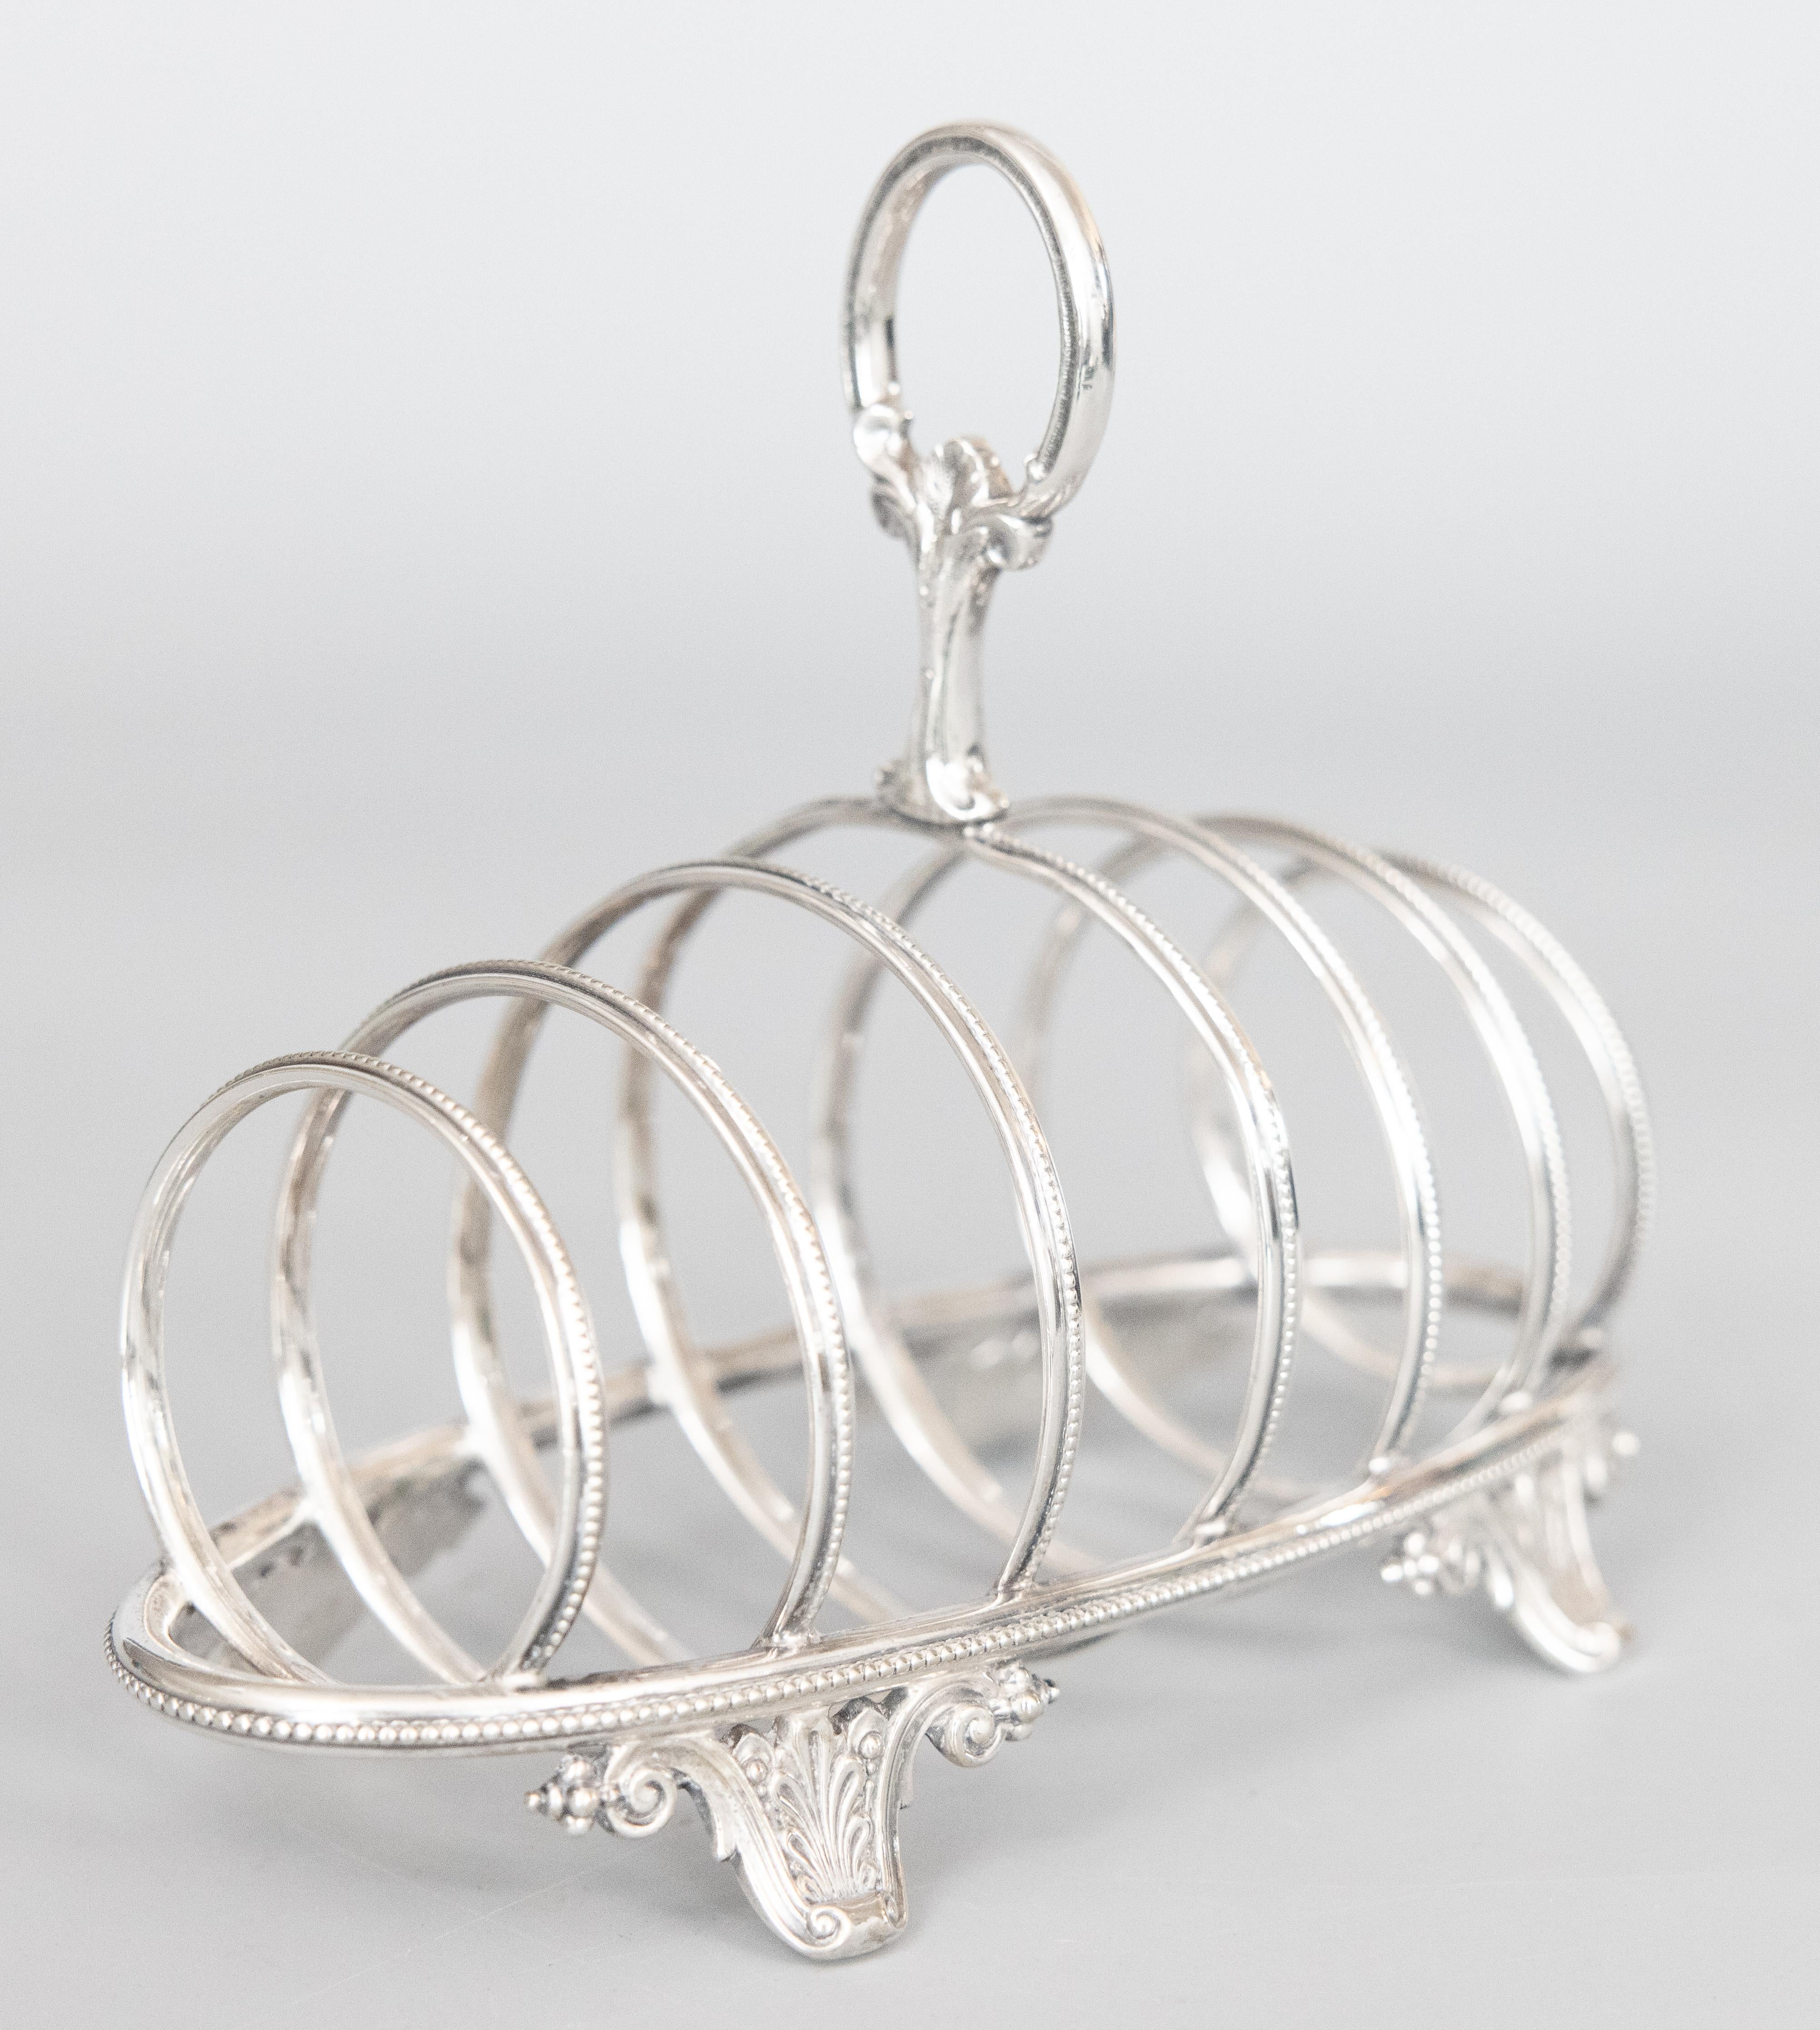 Antique Art Deco English Silver Plate Toast Rack, circa 1900 For Sale 1